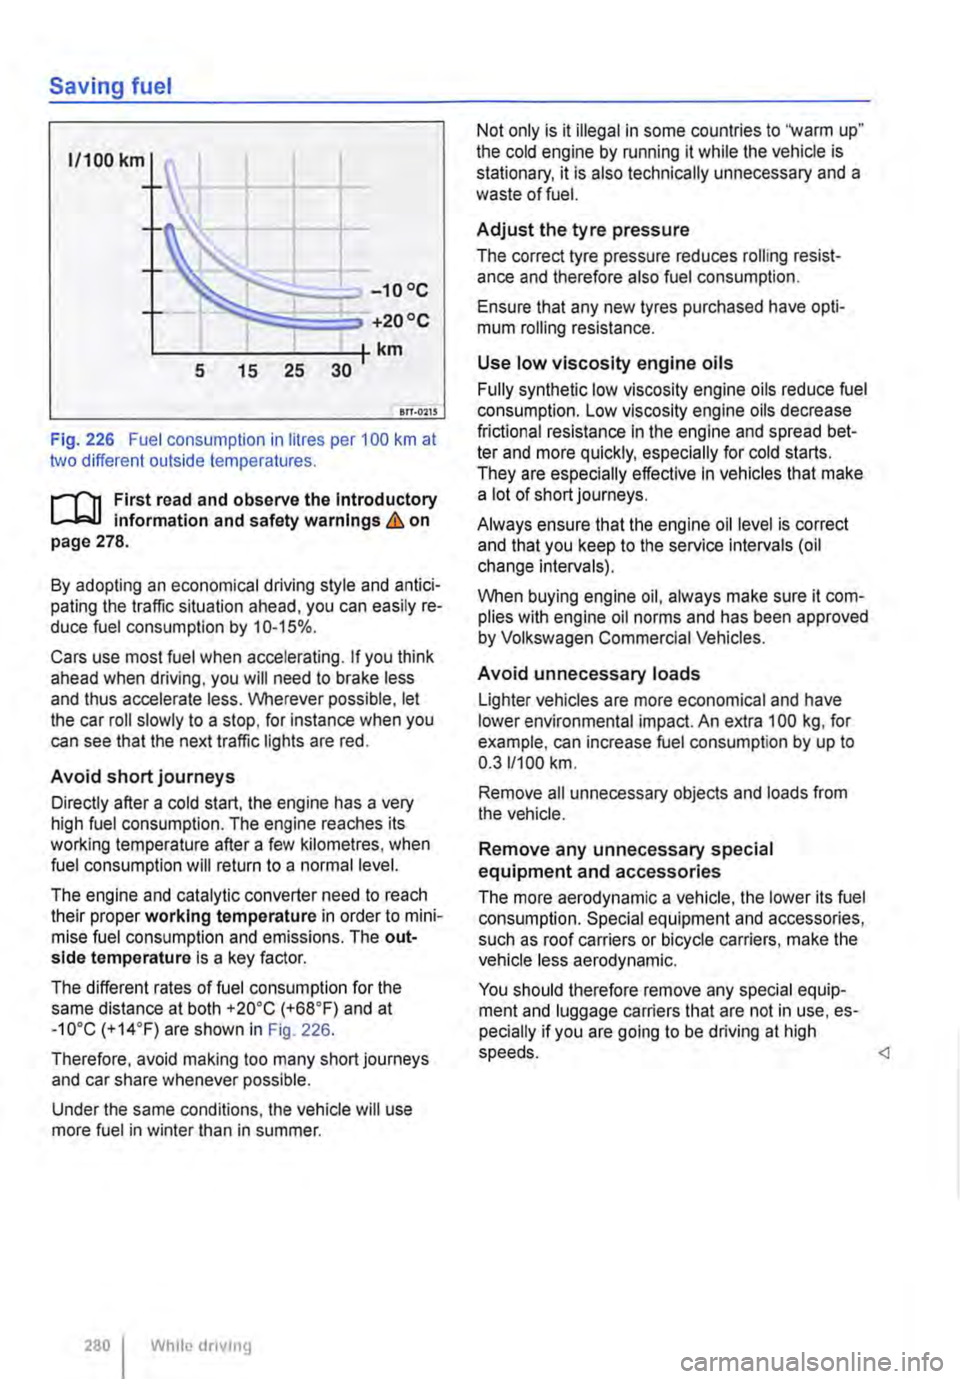 VOLKSWAGEN TRANSPORTER 2012  Owners Manual Saving fuel 
1/100 km 
-10°C 
+20 oc 
L----------------tkm 5 15 25 30 
en-o11S 
Fig. 226 Fuel consumption in litres per 100 km at two different outside temperatures. 
r-1"11 First read and observe t